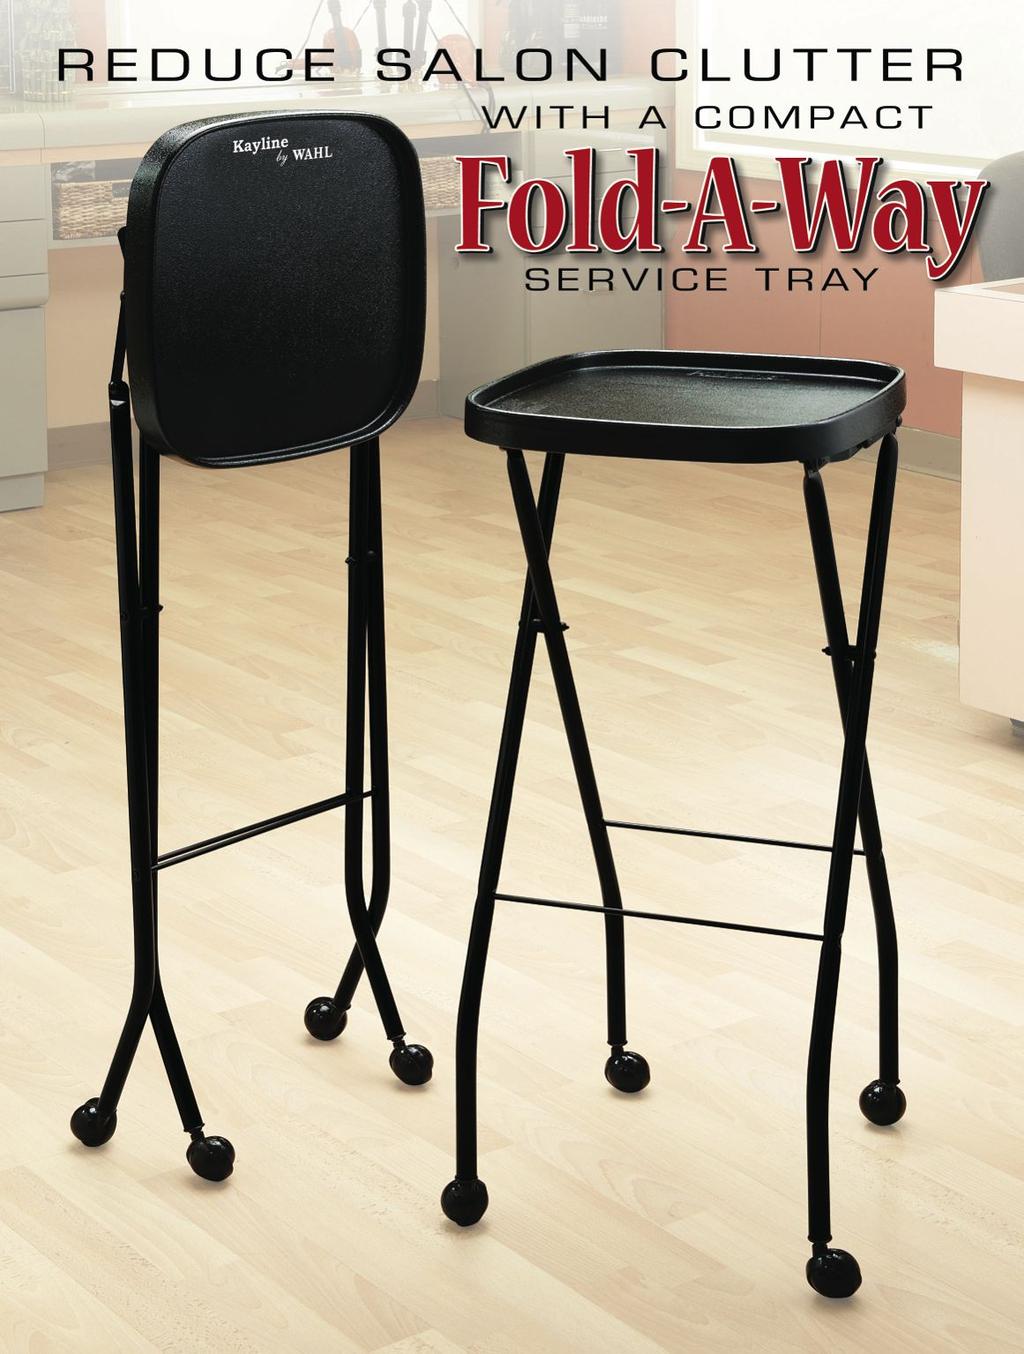 KAYLINE FOLD-A-WAY SERVICE TRAY COLLECTION Folds Easily for Compact Storage. 47 Storage Height.